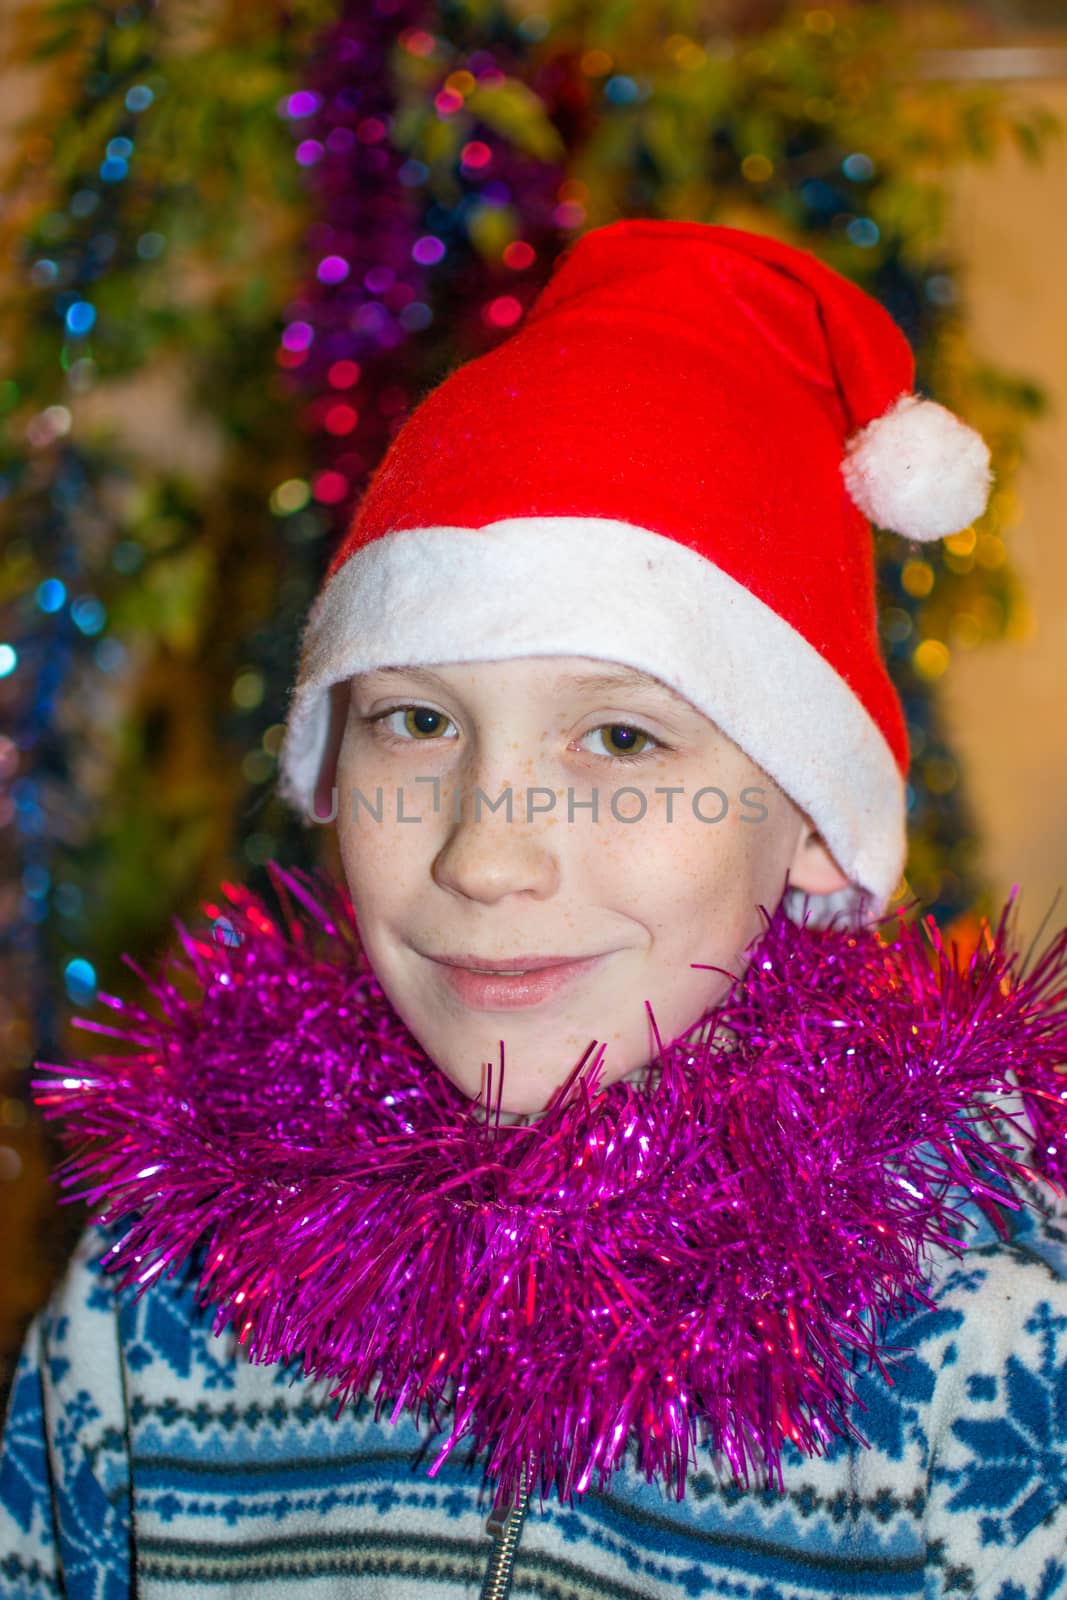 The teenage boy's portrait in a Christmas red hat. by veronka72